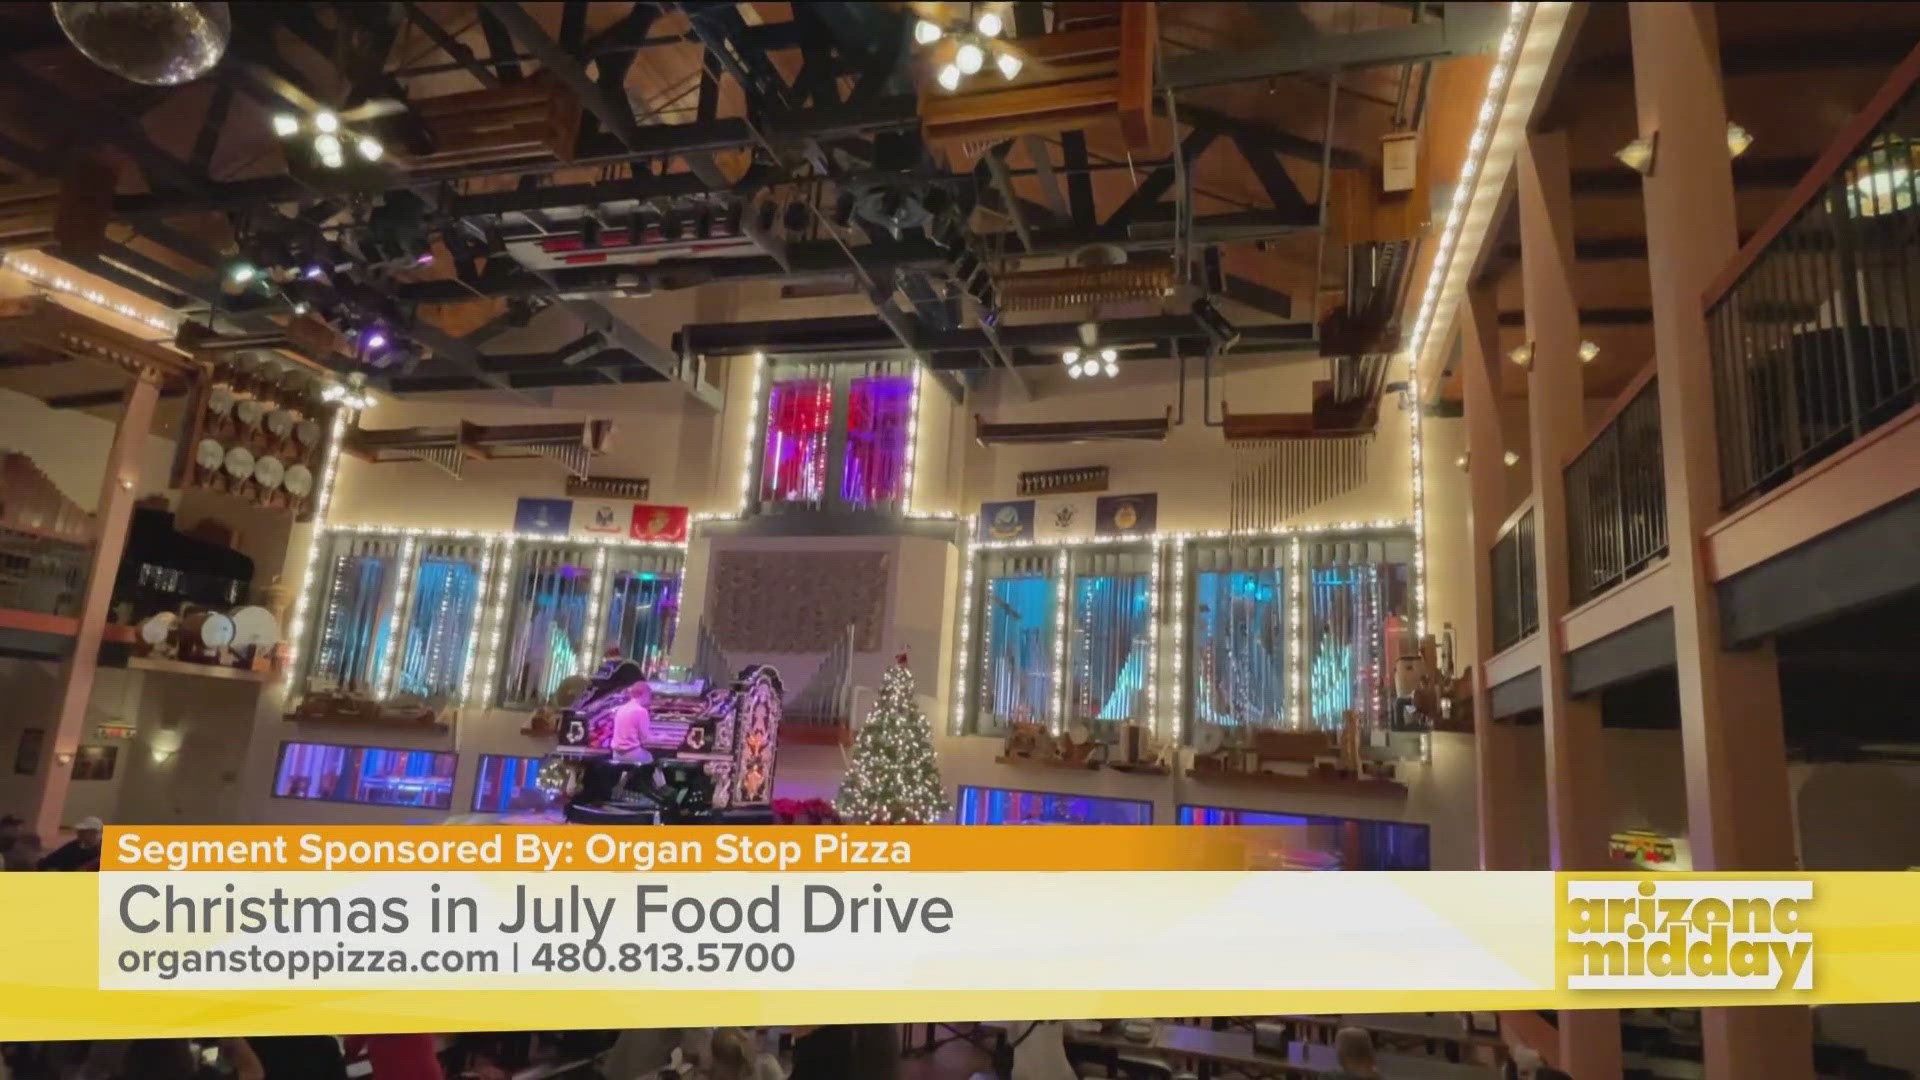 Organ Stop Pizza holds a Christmas in July food drive that supports United Food Bank and you can help!